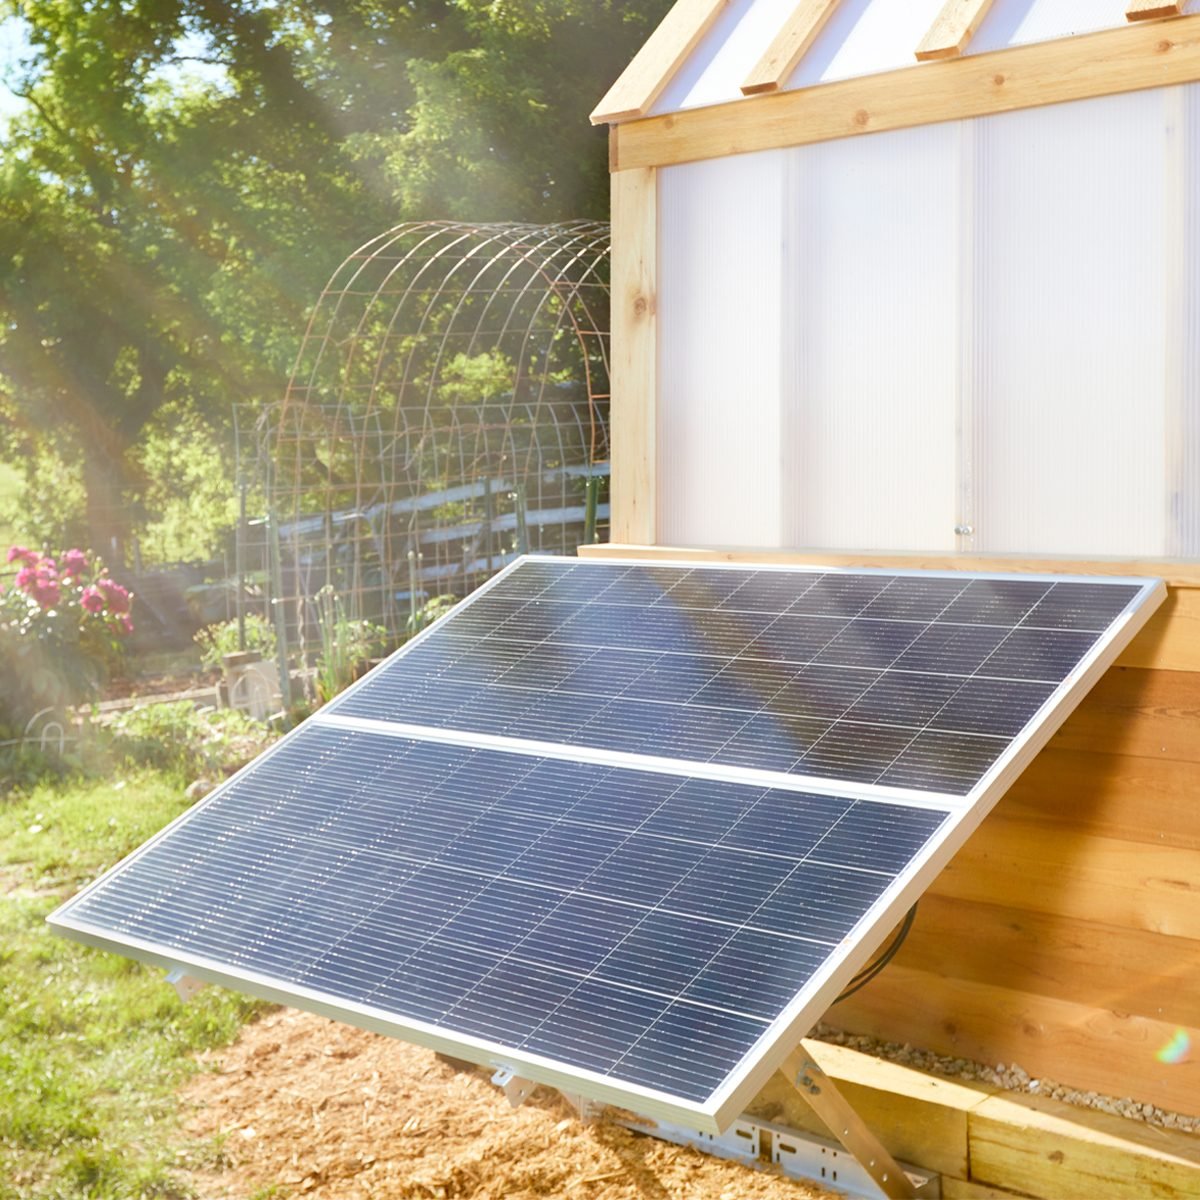 How to Install An Off-Grid Solar Power System